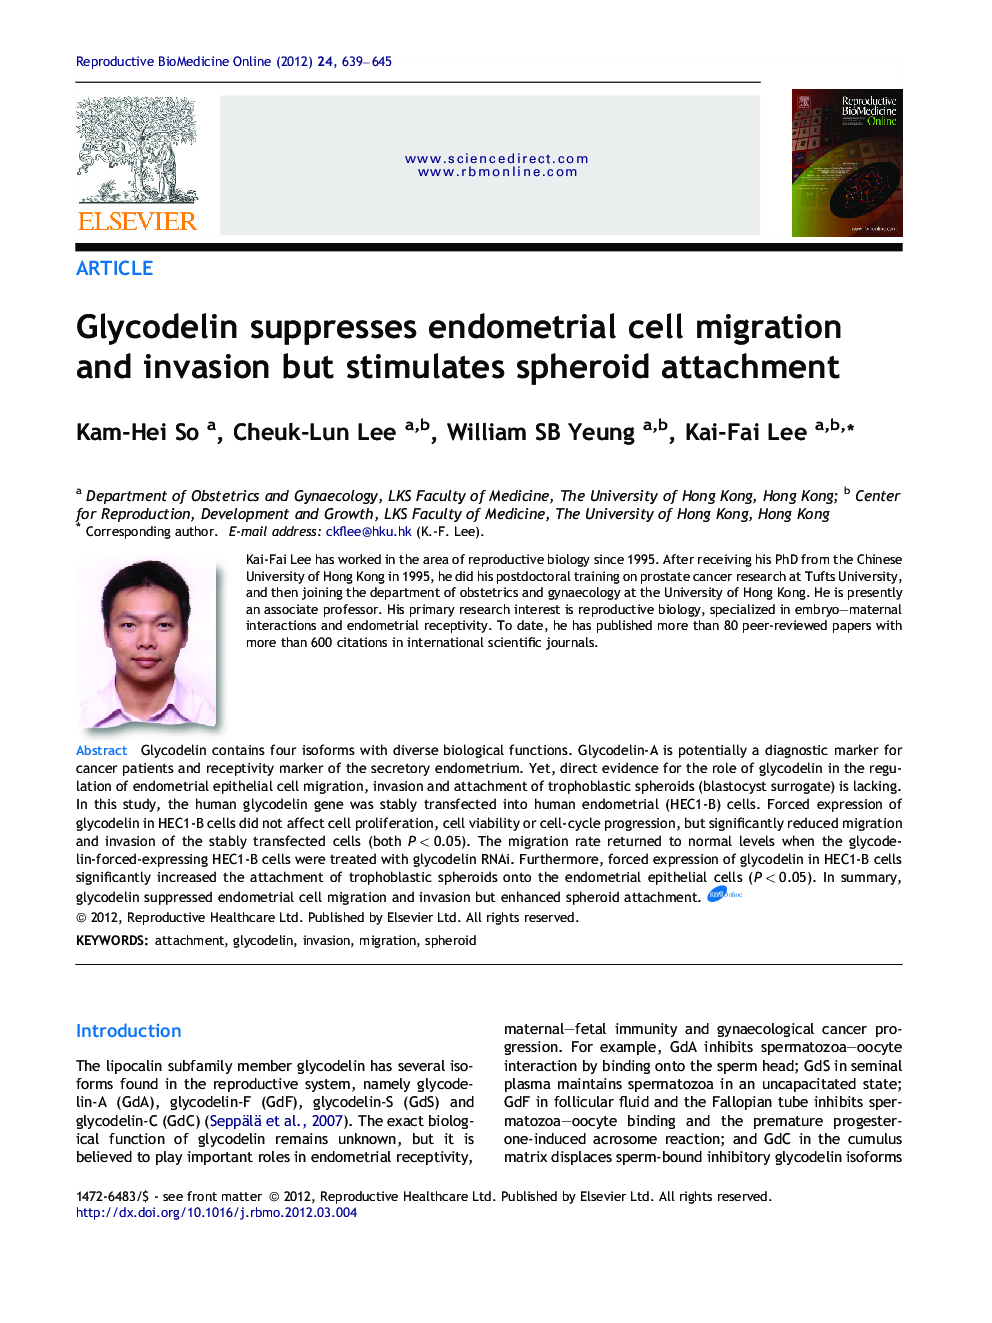 Glycodelin suppresses endometrial cell migration and invasion but stimulates spheroid attachment 